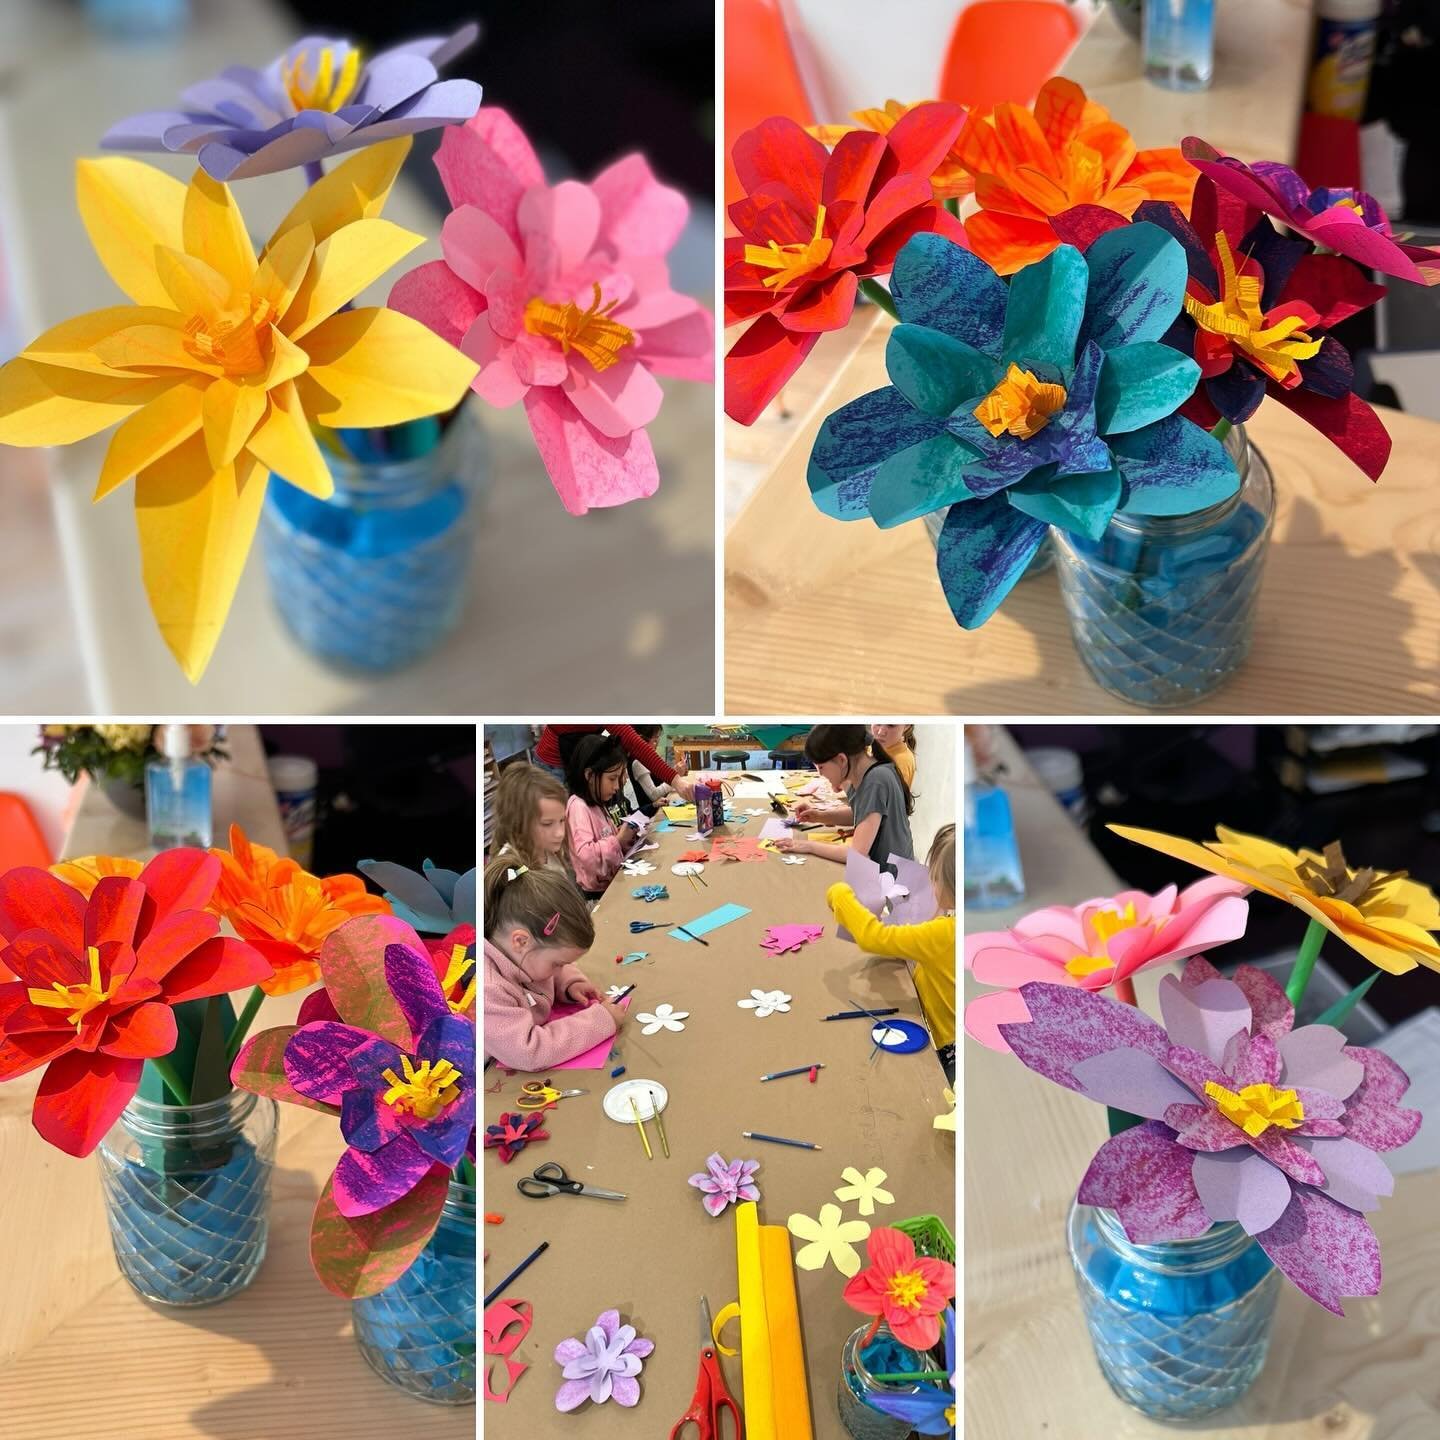 Tonight was our final #KidsNightOut of the school year. We used paper sculpture techniques to create beautiful vases of #paperflowers just in time for #MothersDay ! Our artists did a fantastic job on their flowers, and also had time to enjoy pizza, j